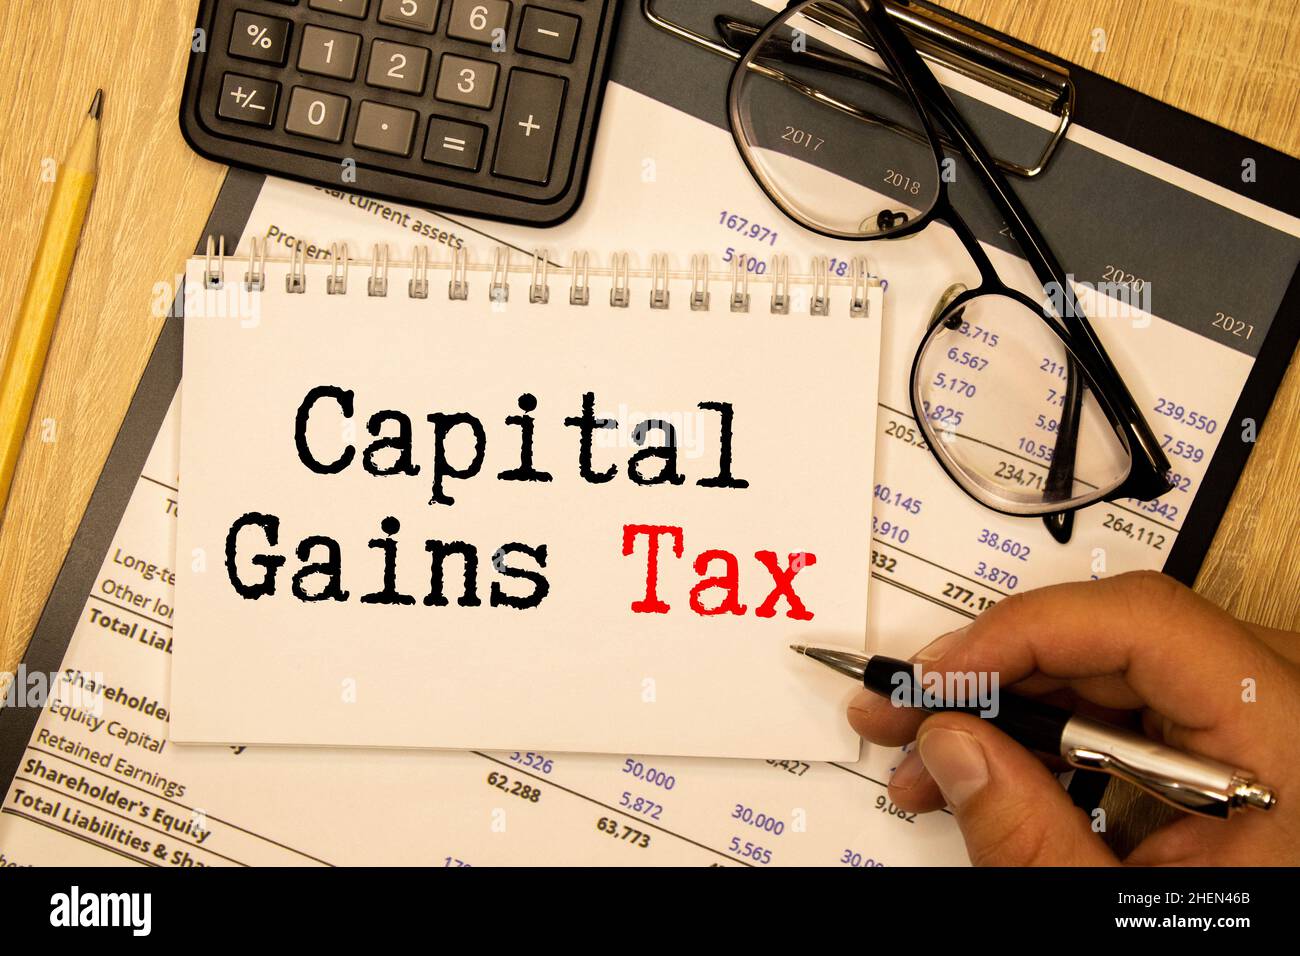 sentence capital gains tax written with chalk on a blackboard, on a table with typewriter. Stock Photo